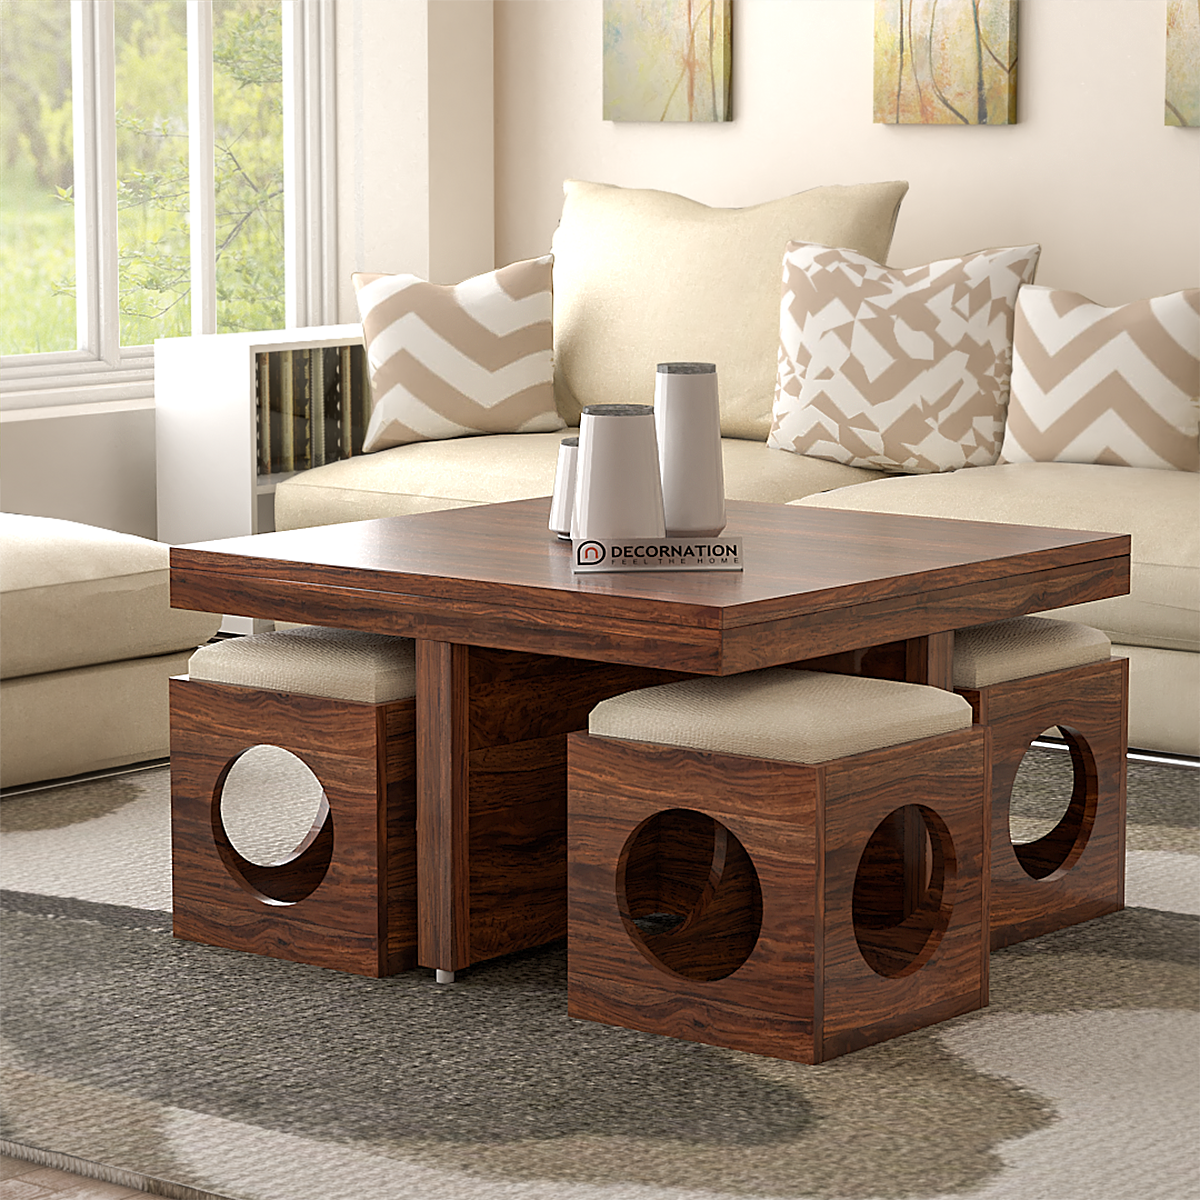 Belfast Wooden Coffee Table With 4 Stools - Brown - Decornation